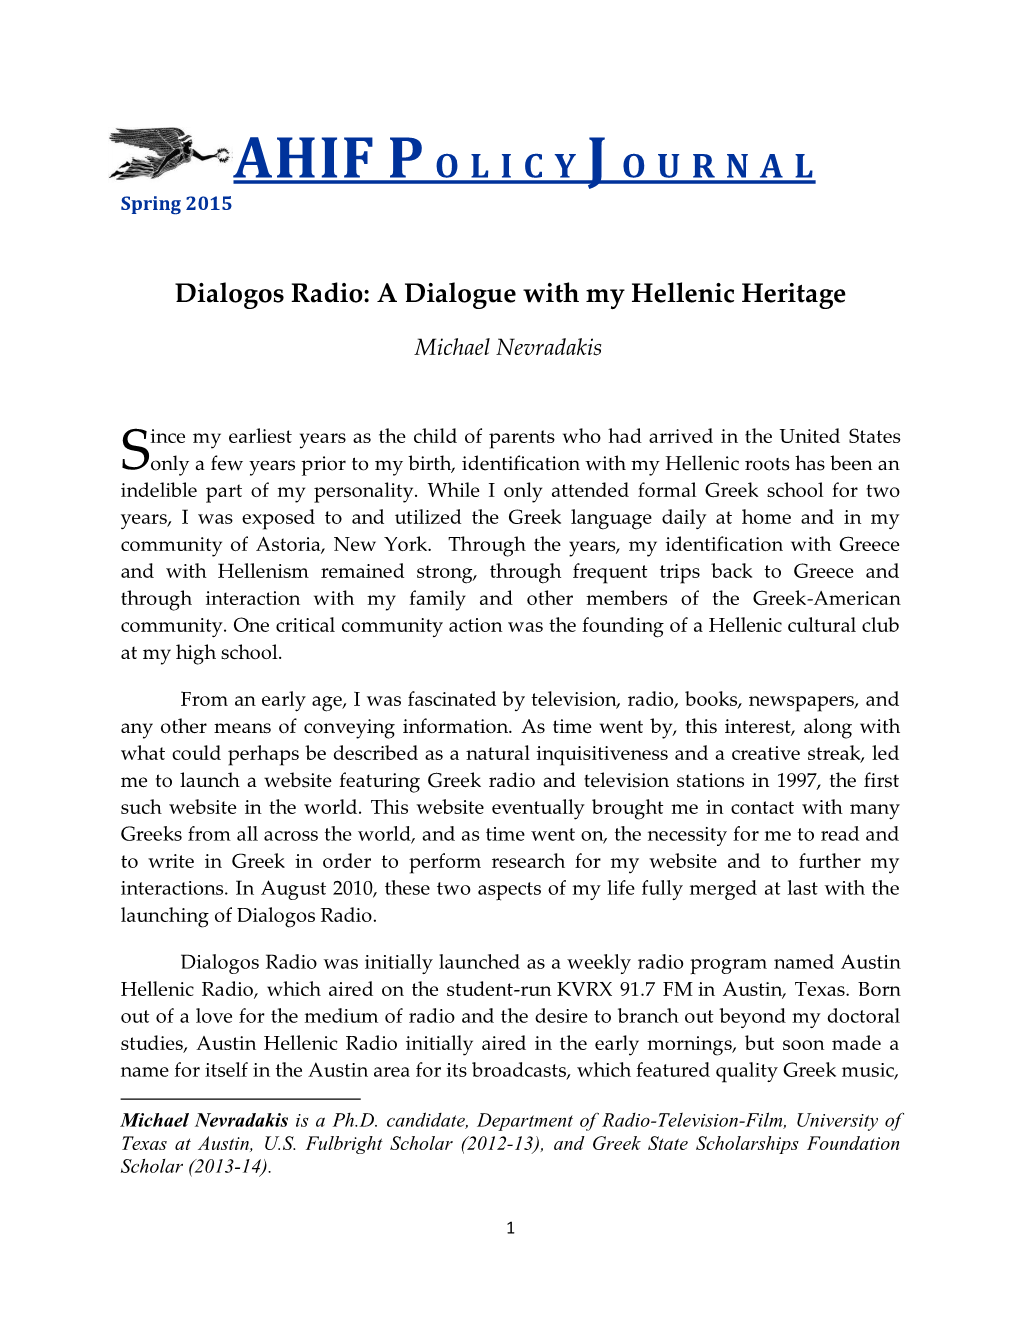 Dialogos Radio: a Dialogue with My Hellenic Heritage